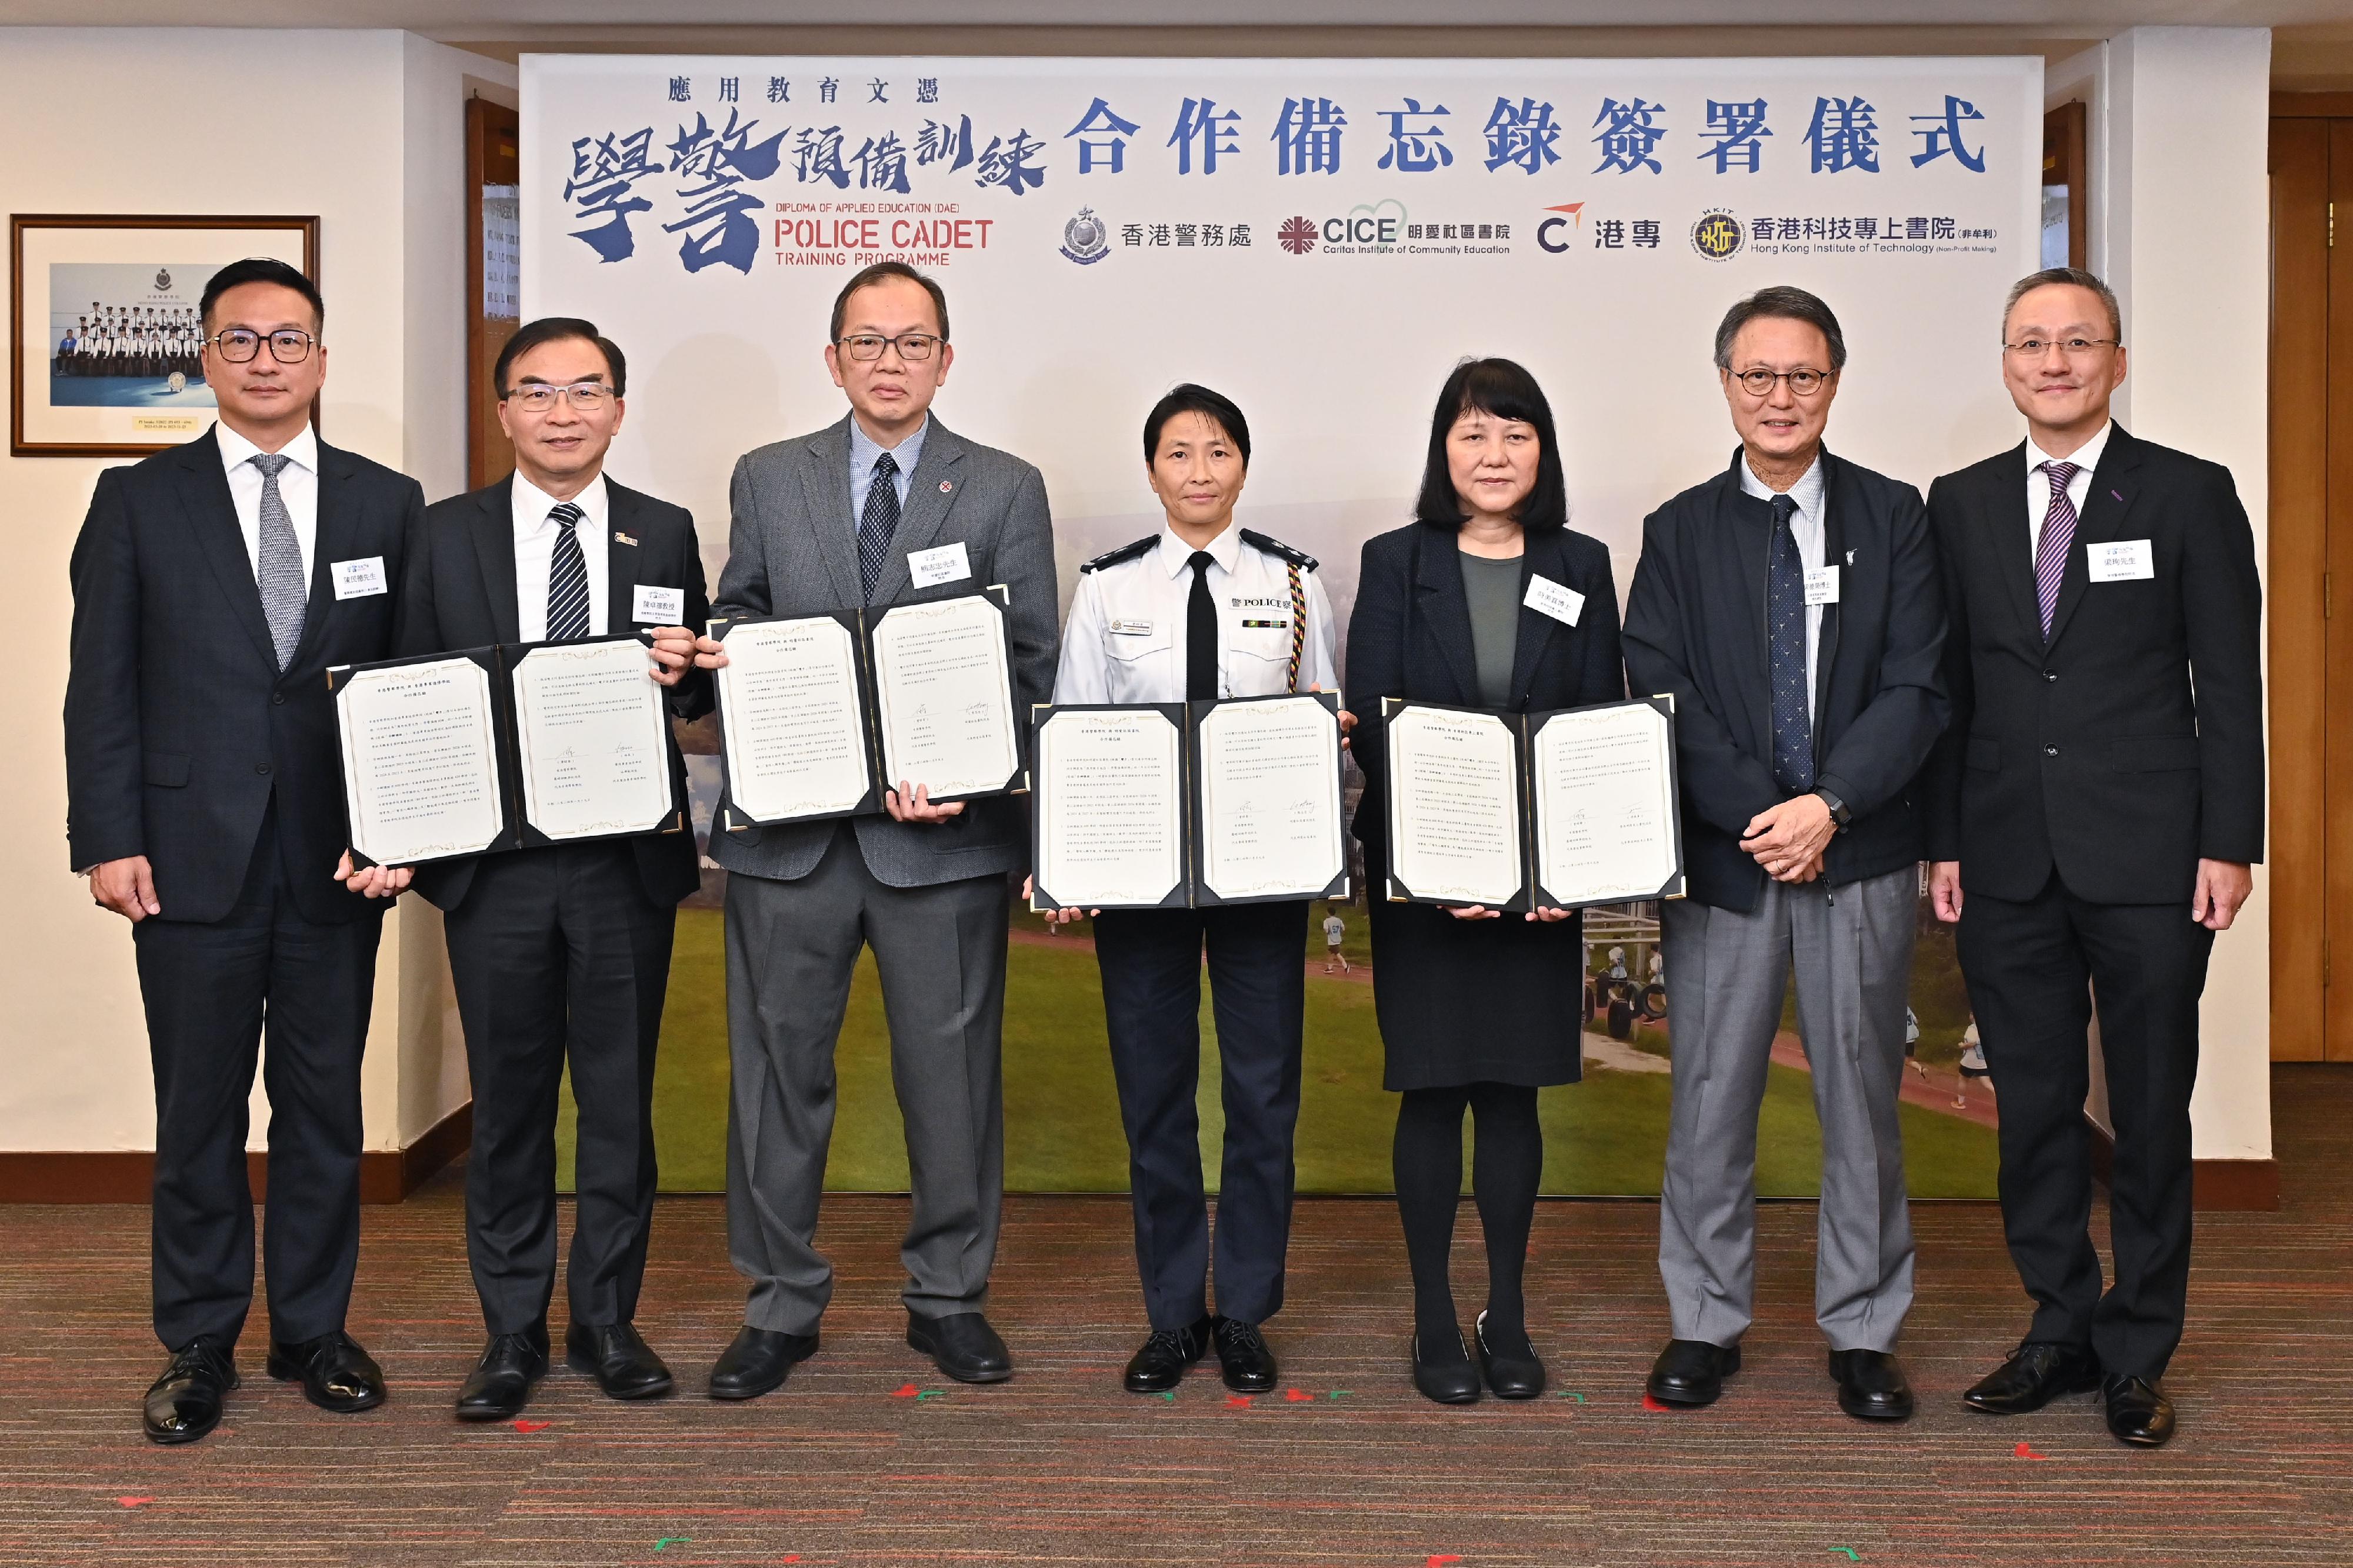 The Hong Kong Police College announced today (January 19) that it will co-organise the “Diploma of Applied Education - Police Cadet Training” Programme with Caritas Institute of Community Education (CICE), Hong Kong College of Technology (HKCT) and Hong Kong Institute of Technology (HKIT) in the 2024/25 academic year. Photo shows (from left) the Assistant Commissioner of Police (Personnel), Mr Chan Man-tak; the President of HKCT, Dr Chan Cheuk-hay; the Principal of CICE, Mr Hung Chi-chung; the Senior Superintendent of Police, School of Foundation Training, Ms Tsang Chiu-tong; the President of HKIT, Dr Shi Mei-chun; Programme Director of Diploma of Applied Education of the Federation for Self-financing Tertiary Education, Dr Simon Leung; and the Acting Director of the Hong Kong Police College, Mr Leung Shun, at the Memorandum of Understanding signing ceremony.